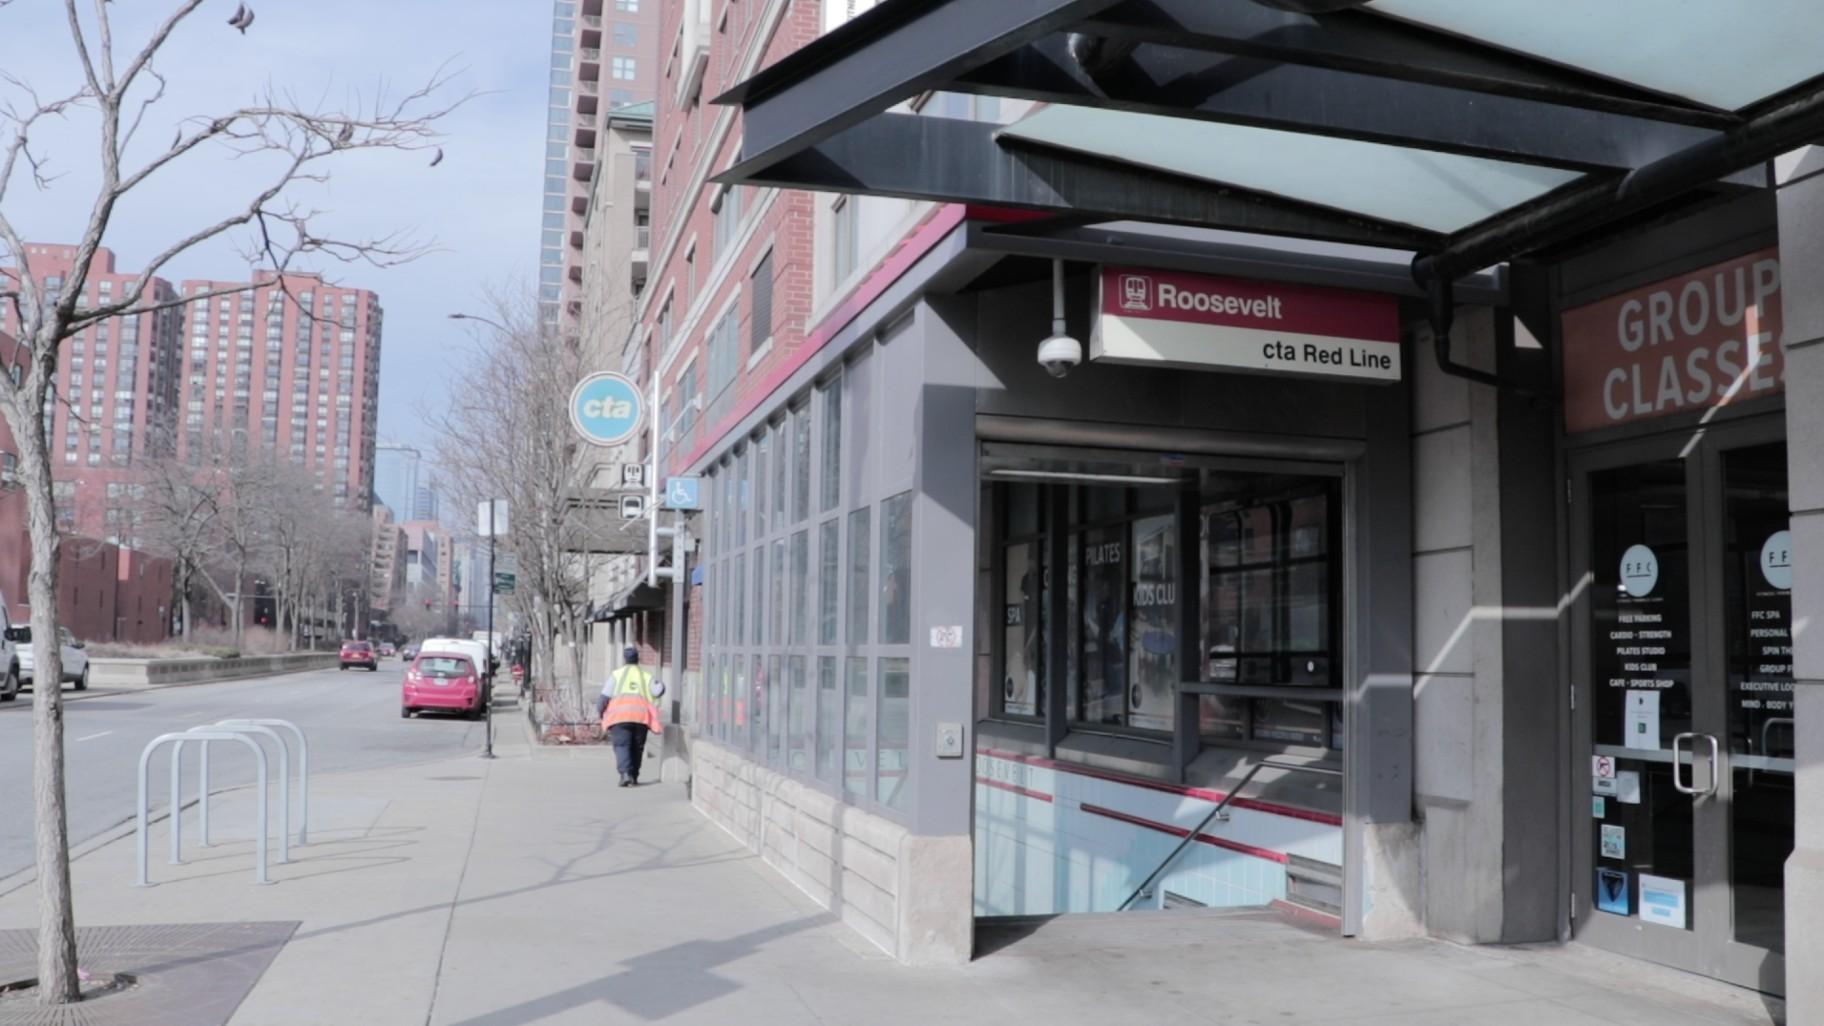 The Roosevelt Red Line station is one of three CTA stations that a group of students are focusing on for their project about improving stations through rider feedback. (Nicole Cardos / WTTW News)